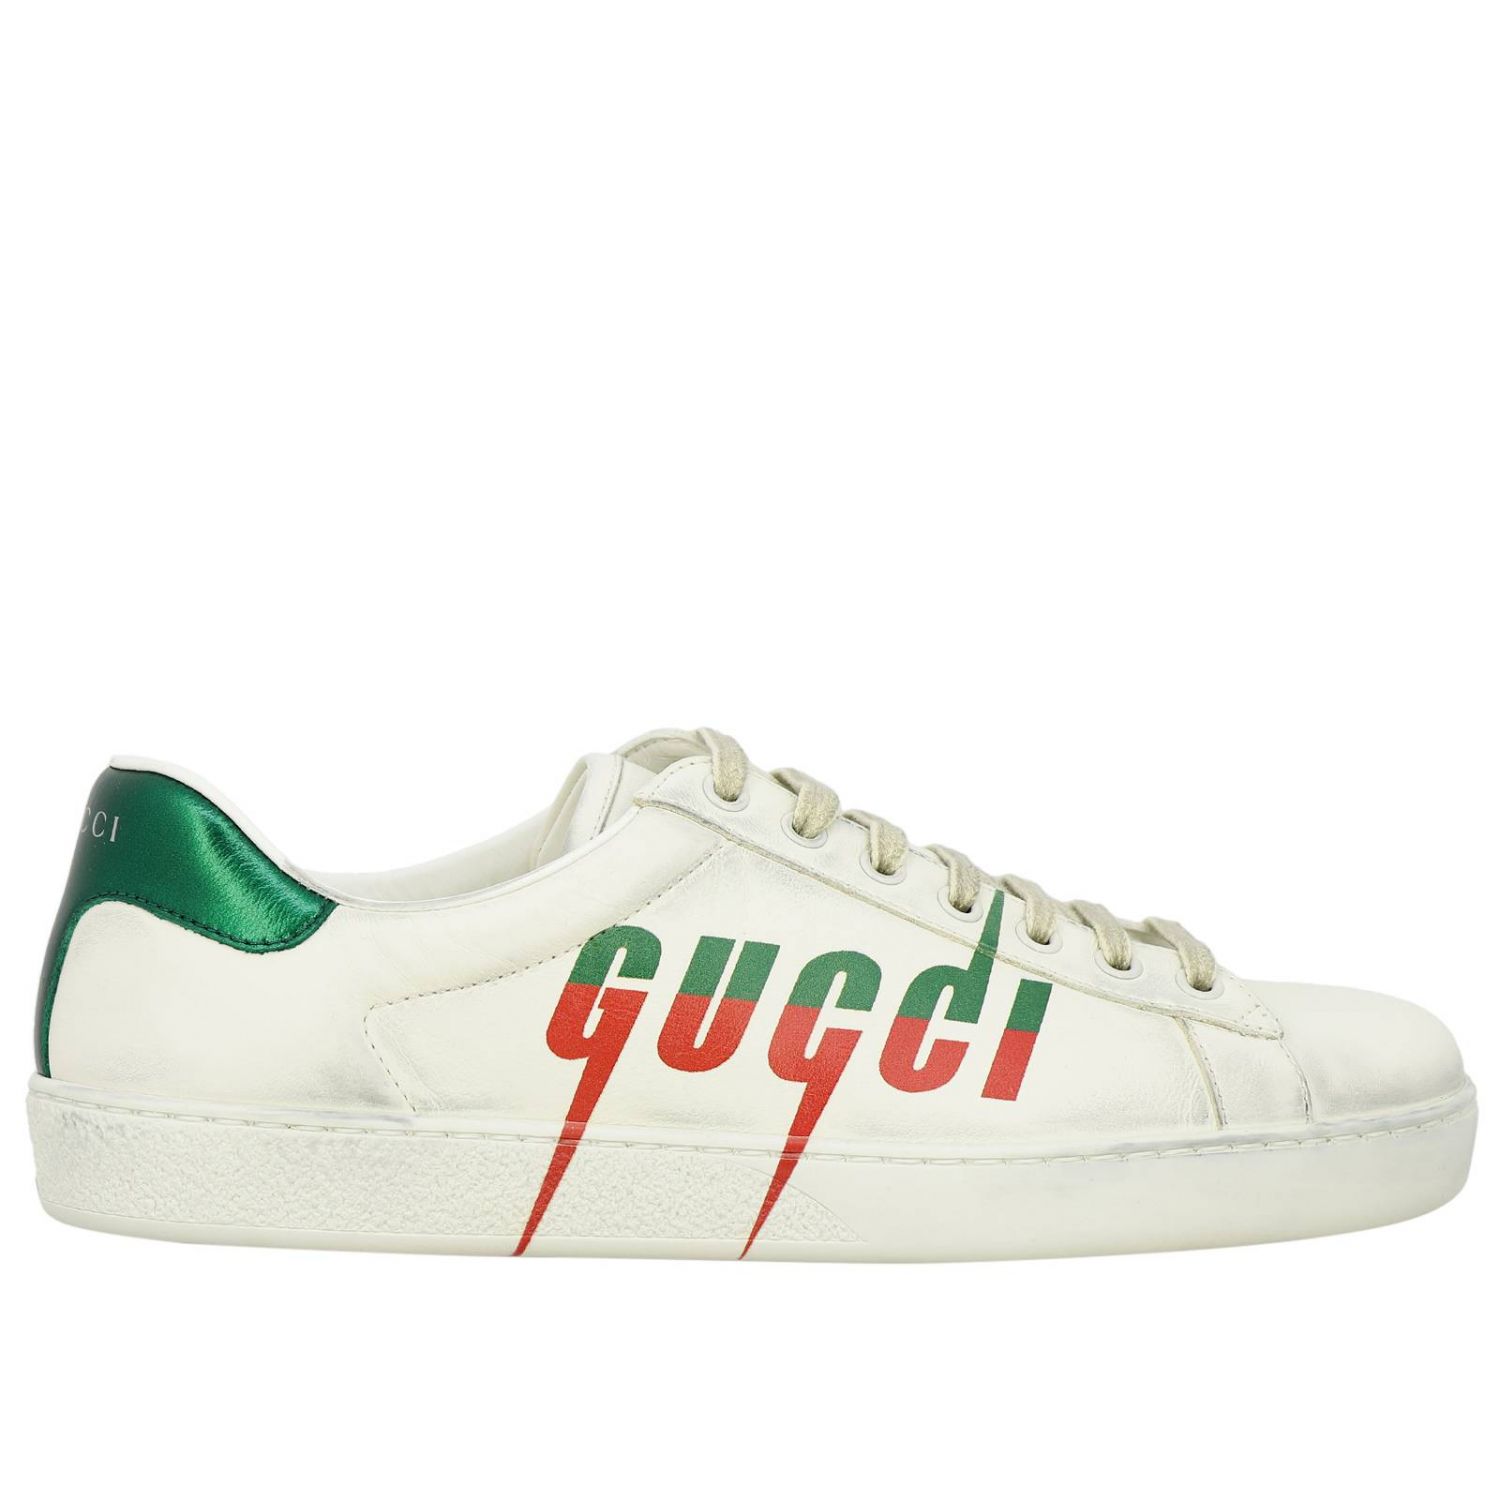 GUCCI: New Ace lace-up sneakers in vintage leather with print